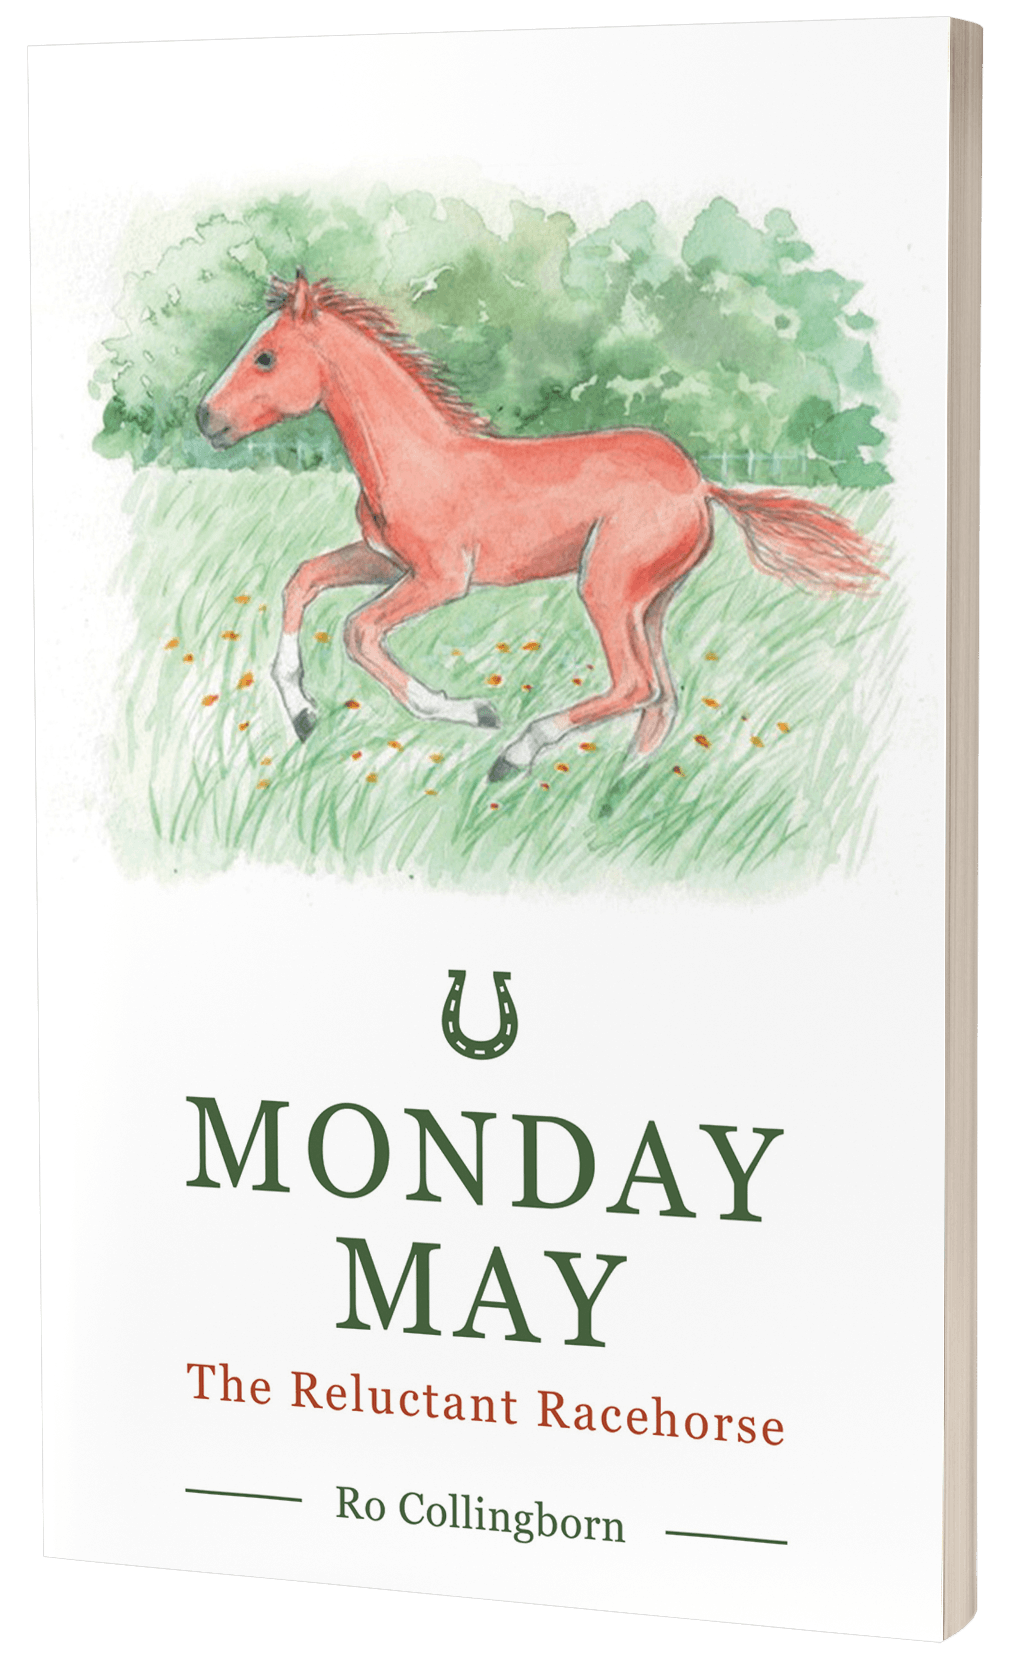 Monday May - The Reluctant Racehorse by Ro Collingborn